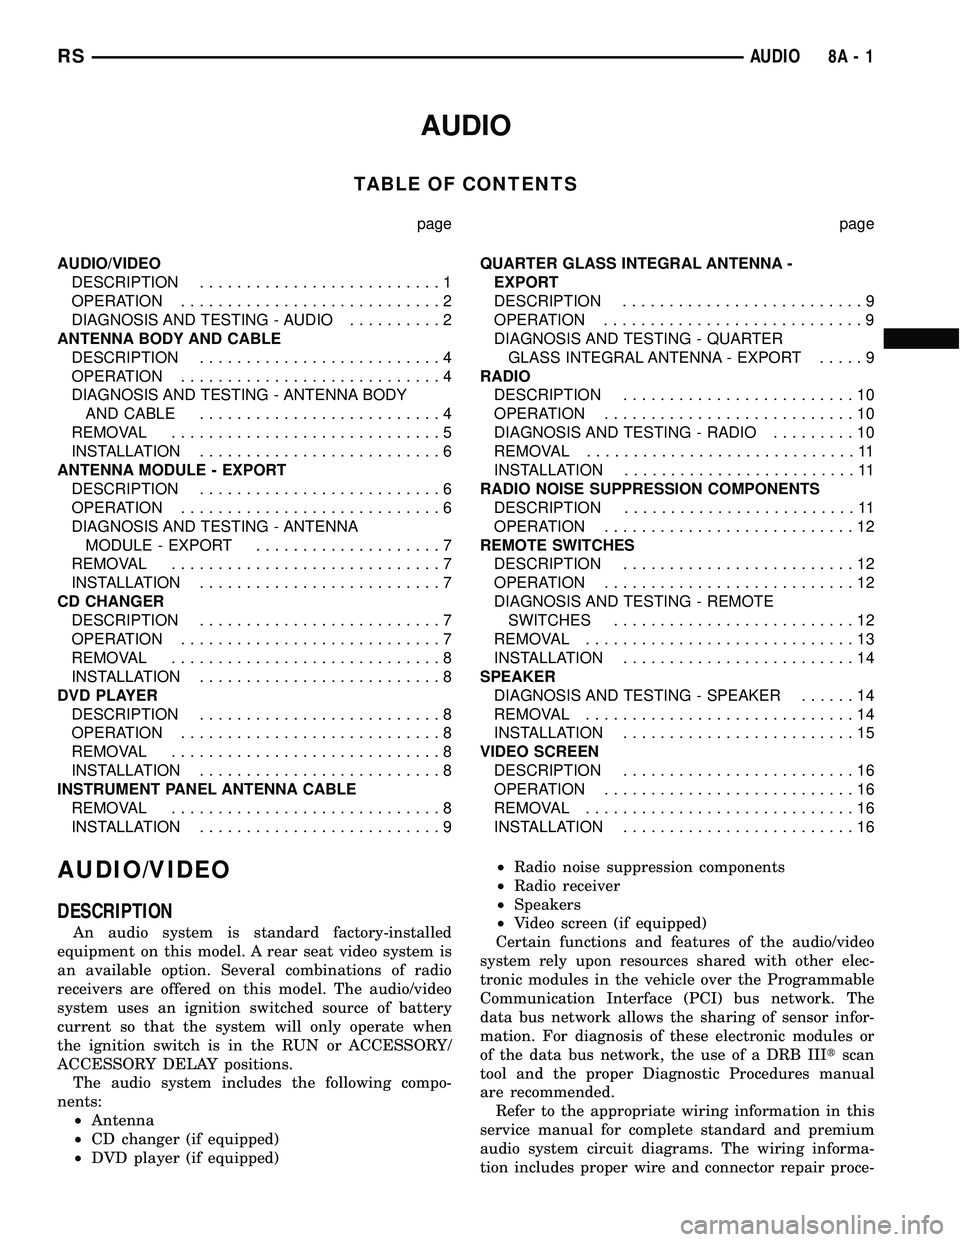 DODGE TOWN AND COUNTRY 2004  Service Manual AUDIO
TABLE OF CONTENTS
page page
AUDIO/VIDEO
DESCRIPTION..........................1
OPERATION............................2
DIAGNOSIS AND TESTING - AUDIO..........2
ANTENNA BODY AND CABLE
DESCRIPTION.